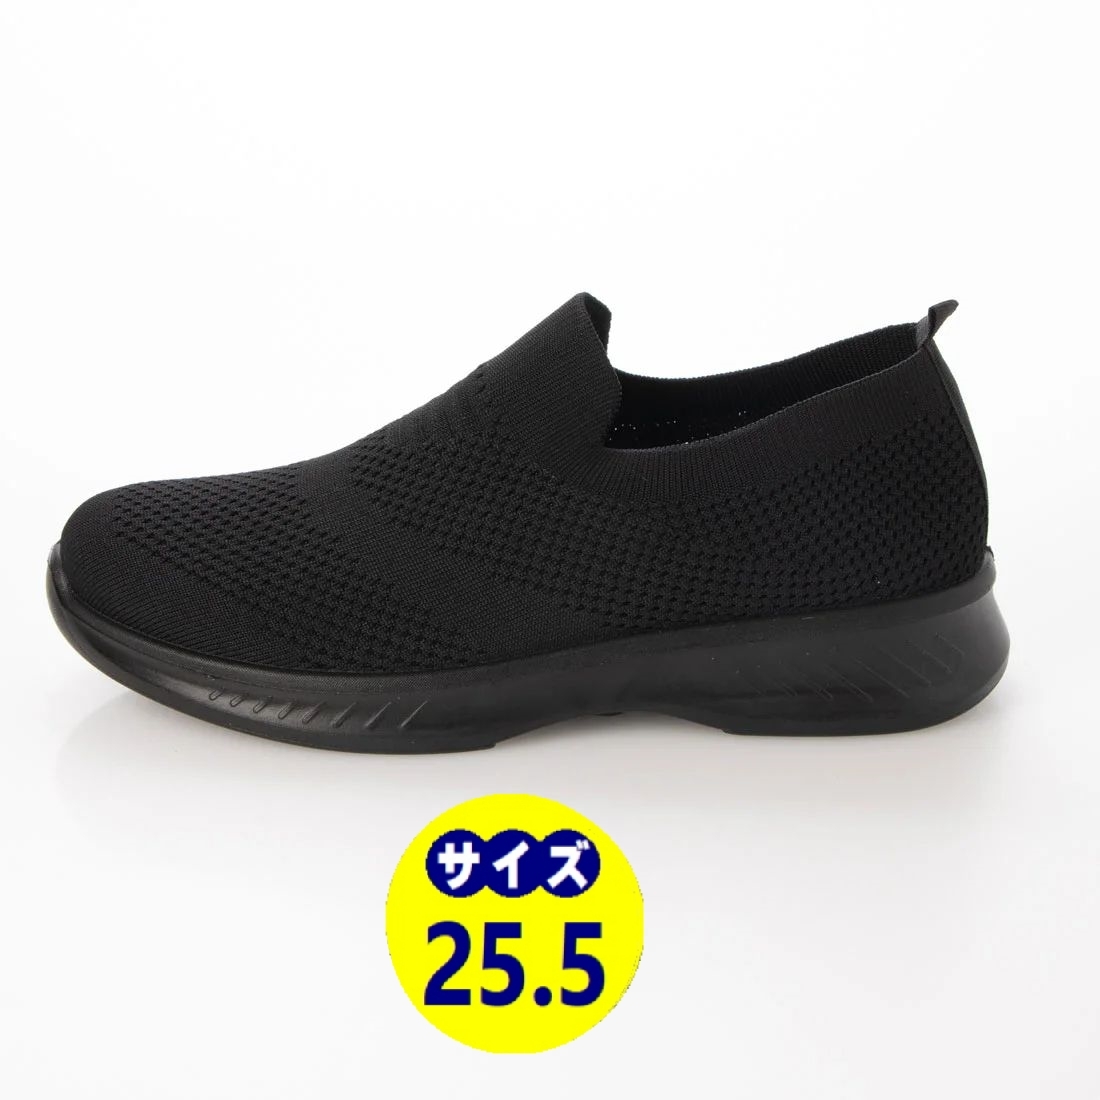  fly knitted sneakers slip-on shoes sneakers new goods [22537-BLK-255]25.5cm walk interior put on footwear 